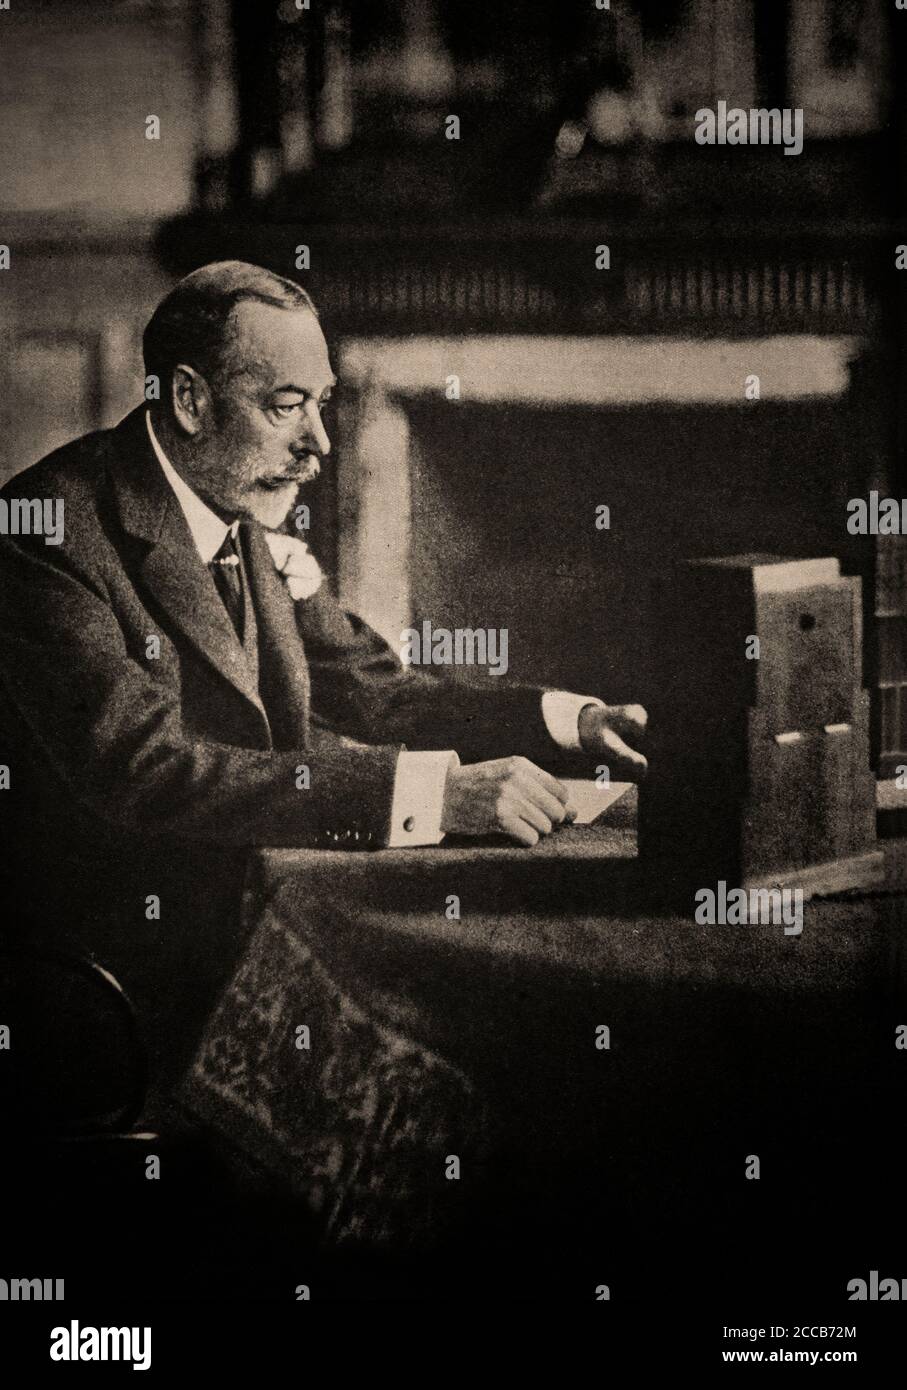 King George V was the first monarch to make a Christmas Day broadcast in 1932. Taking place in Sandringham, it was a practise he would continue for the following three years until his death in January 1936. Stock Photo